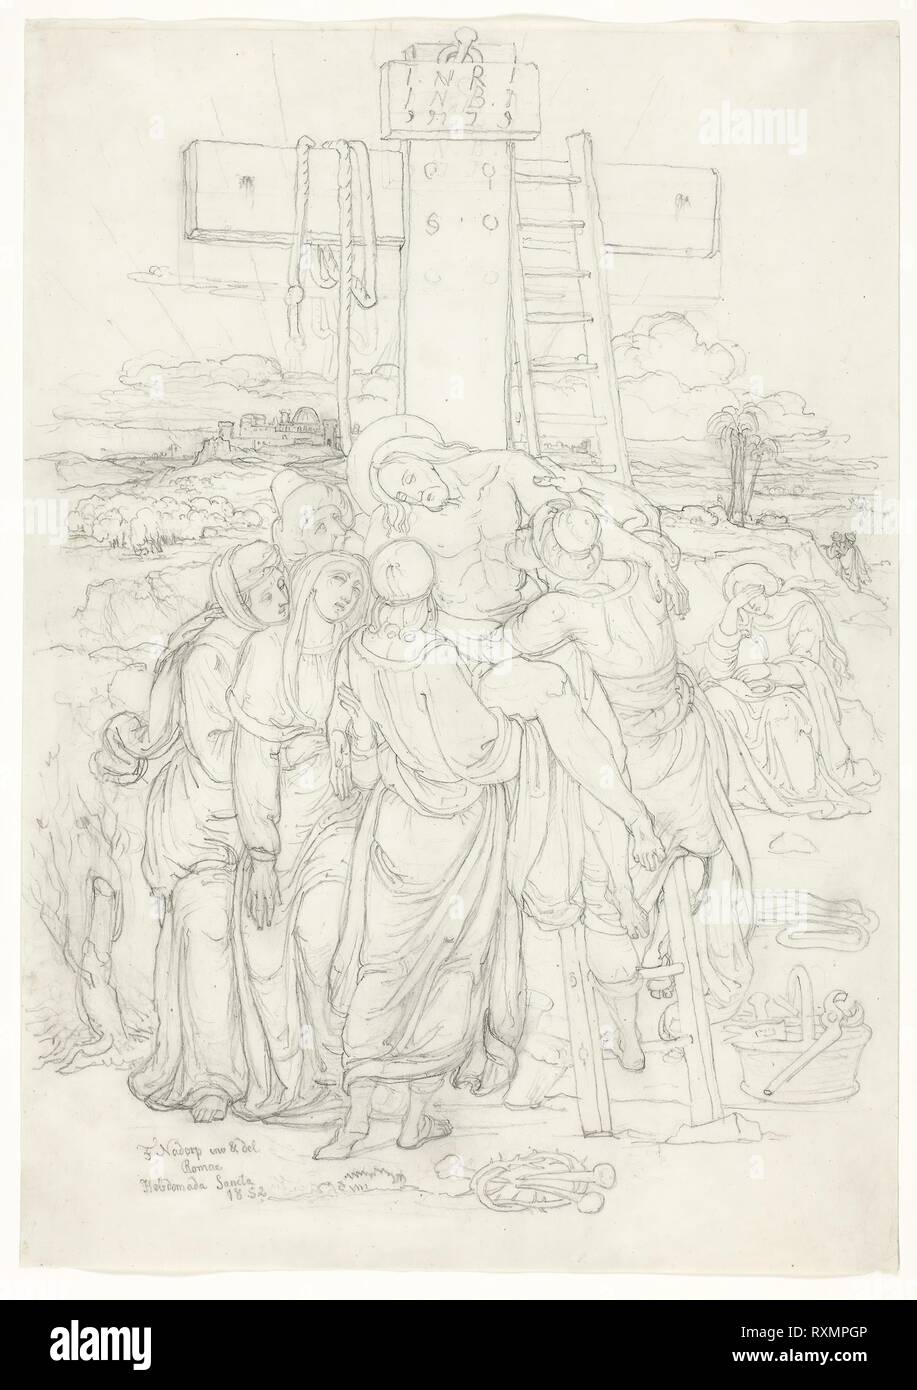 Descent from the Cross with a Silhouette of Jerusalem in the Background. Franz Johann Heinrich Nadorp; German, 1794-1876. Date: 1852. Dimensions: 408 × 287 mm. Graphite, with smudging, on ivory wove paper. Origin: Germany. Museum: The Chicago Art Institute. Stock Photo